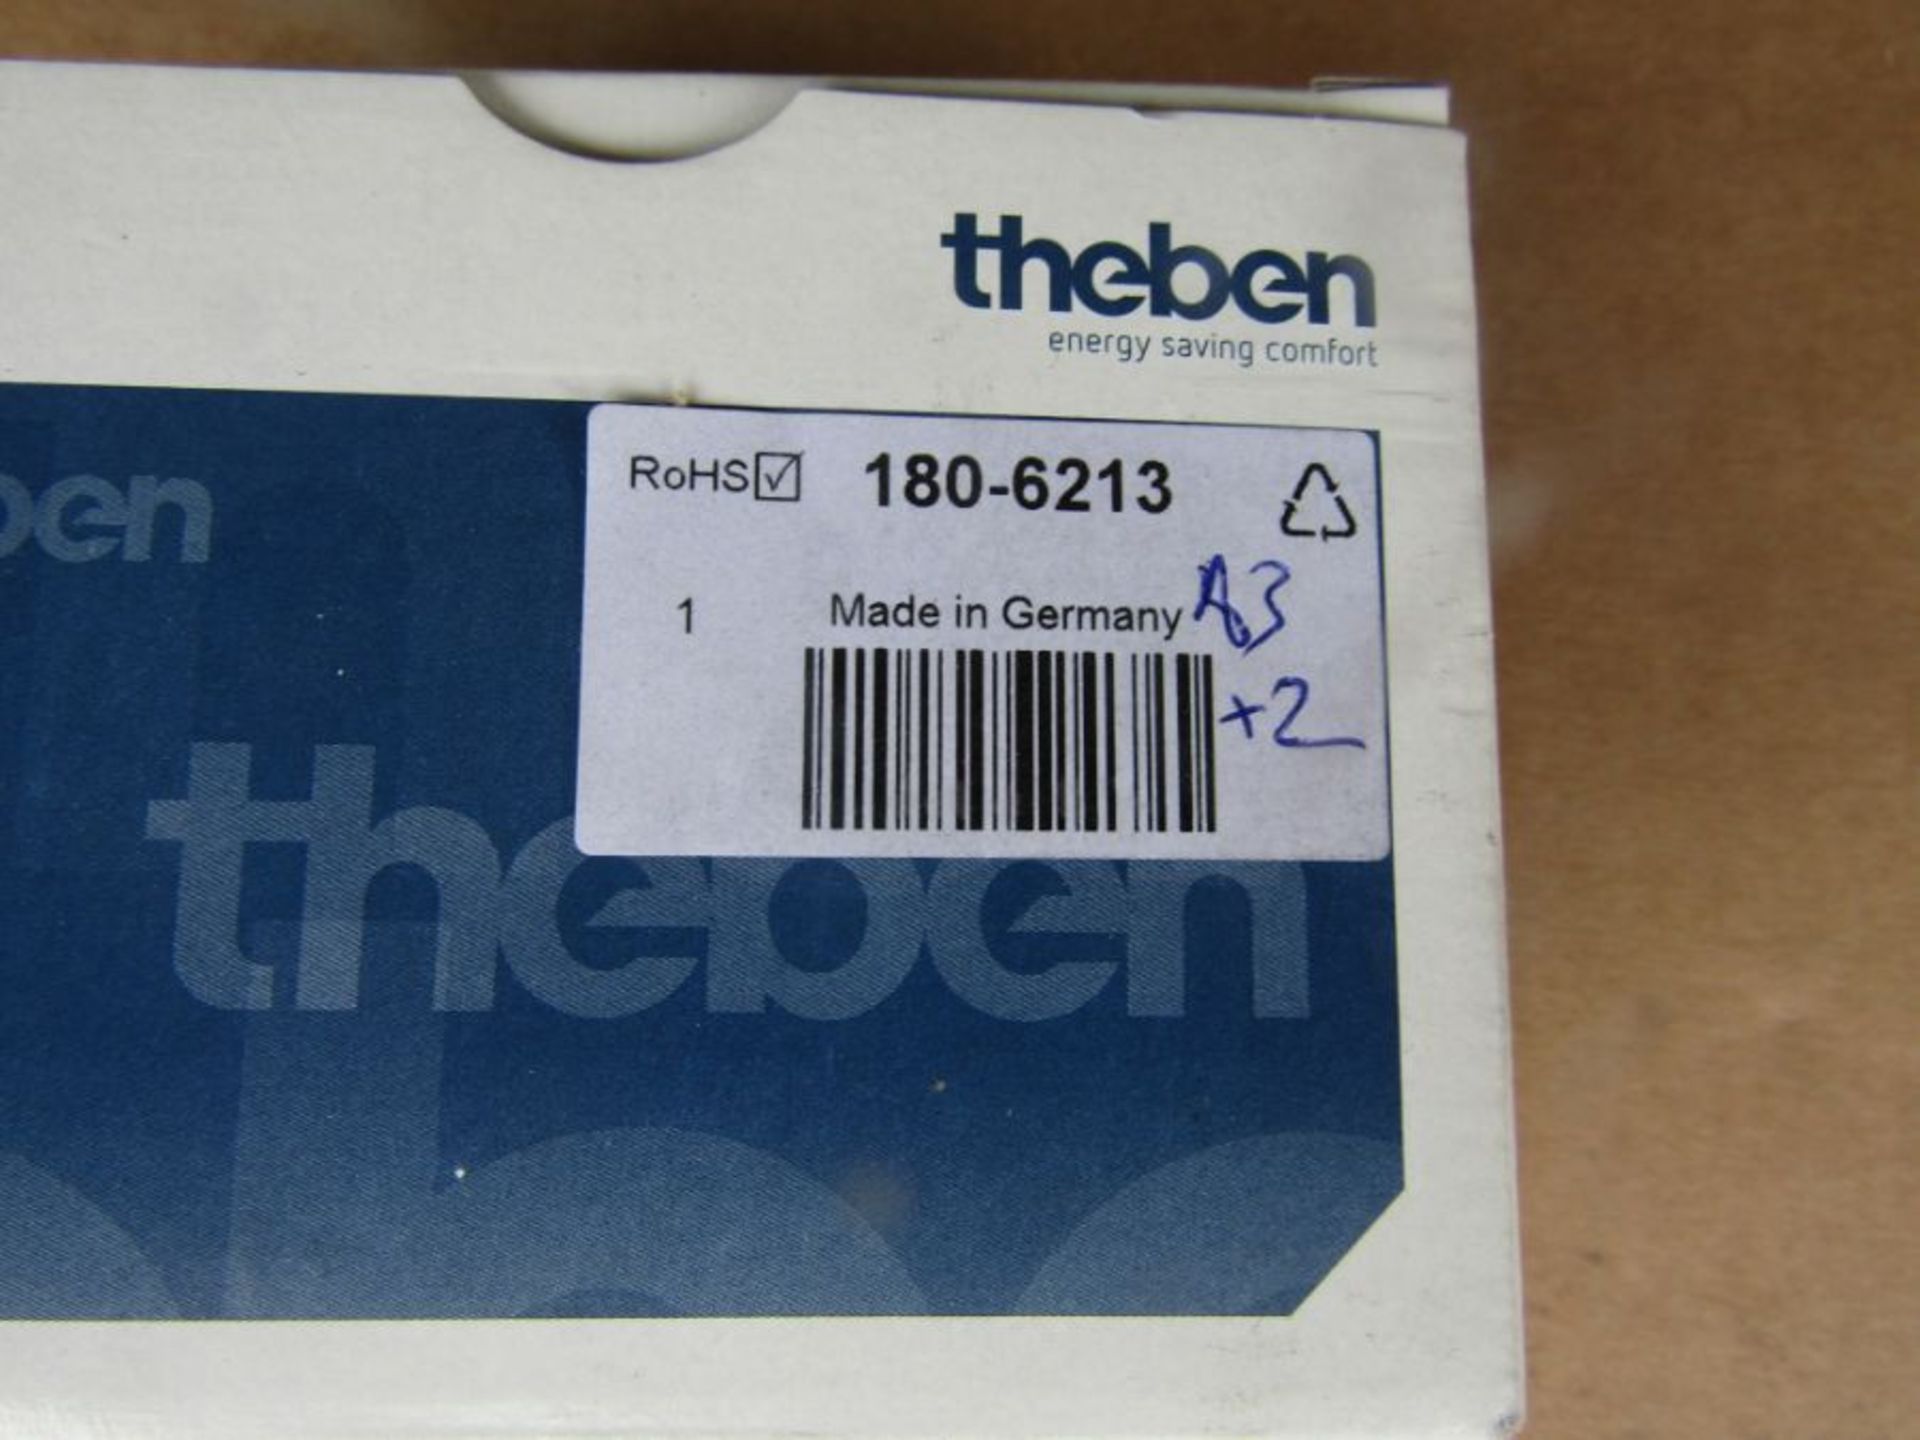 Theben Digital SELEKTA 171 RC TOP 3 DIN Rail Time Switch 110 230 V ac 1-Channel A3 1806213 - Image 3 of 6